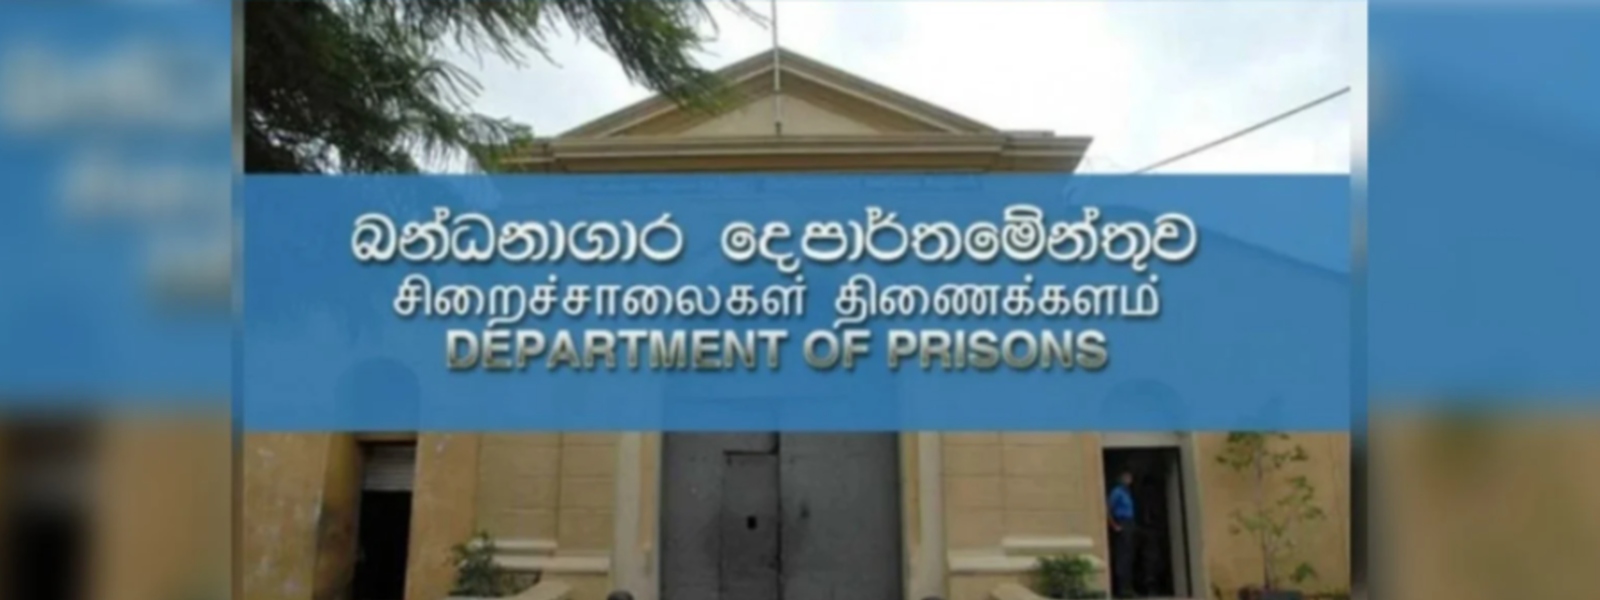 Prisoners will only be released after 14-days in Quarantine